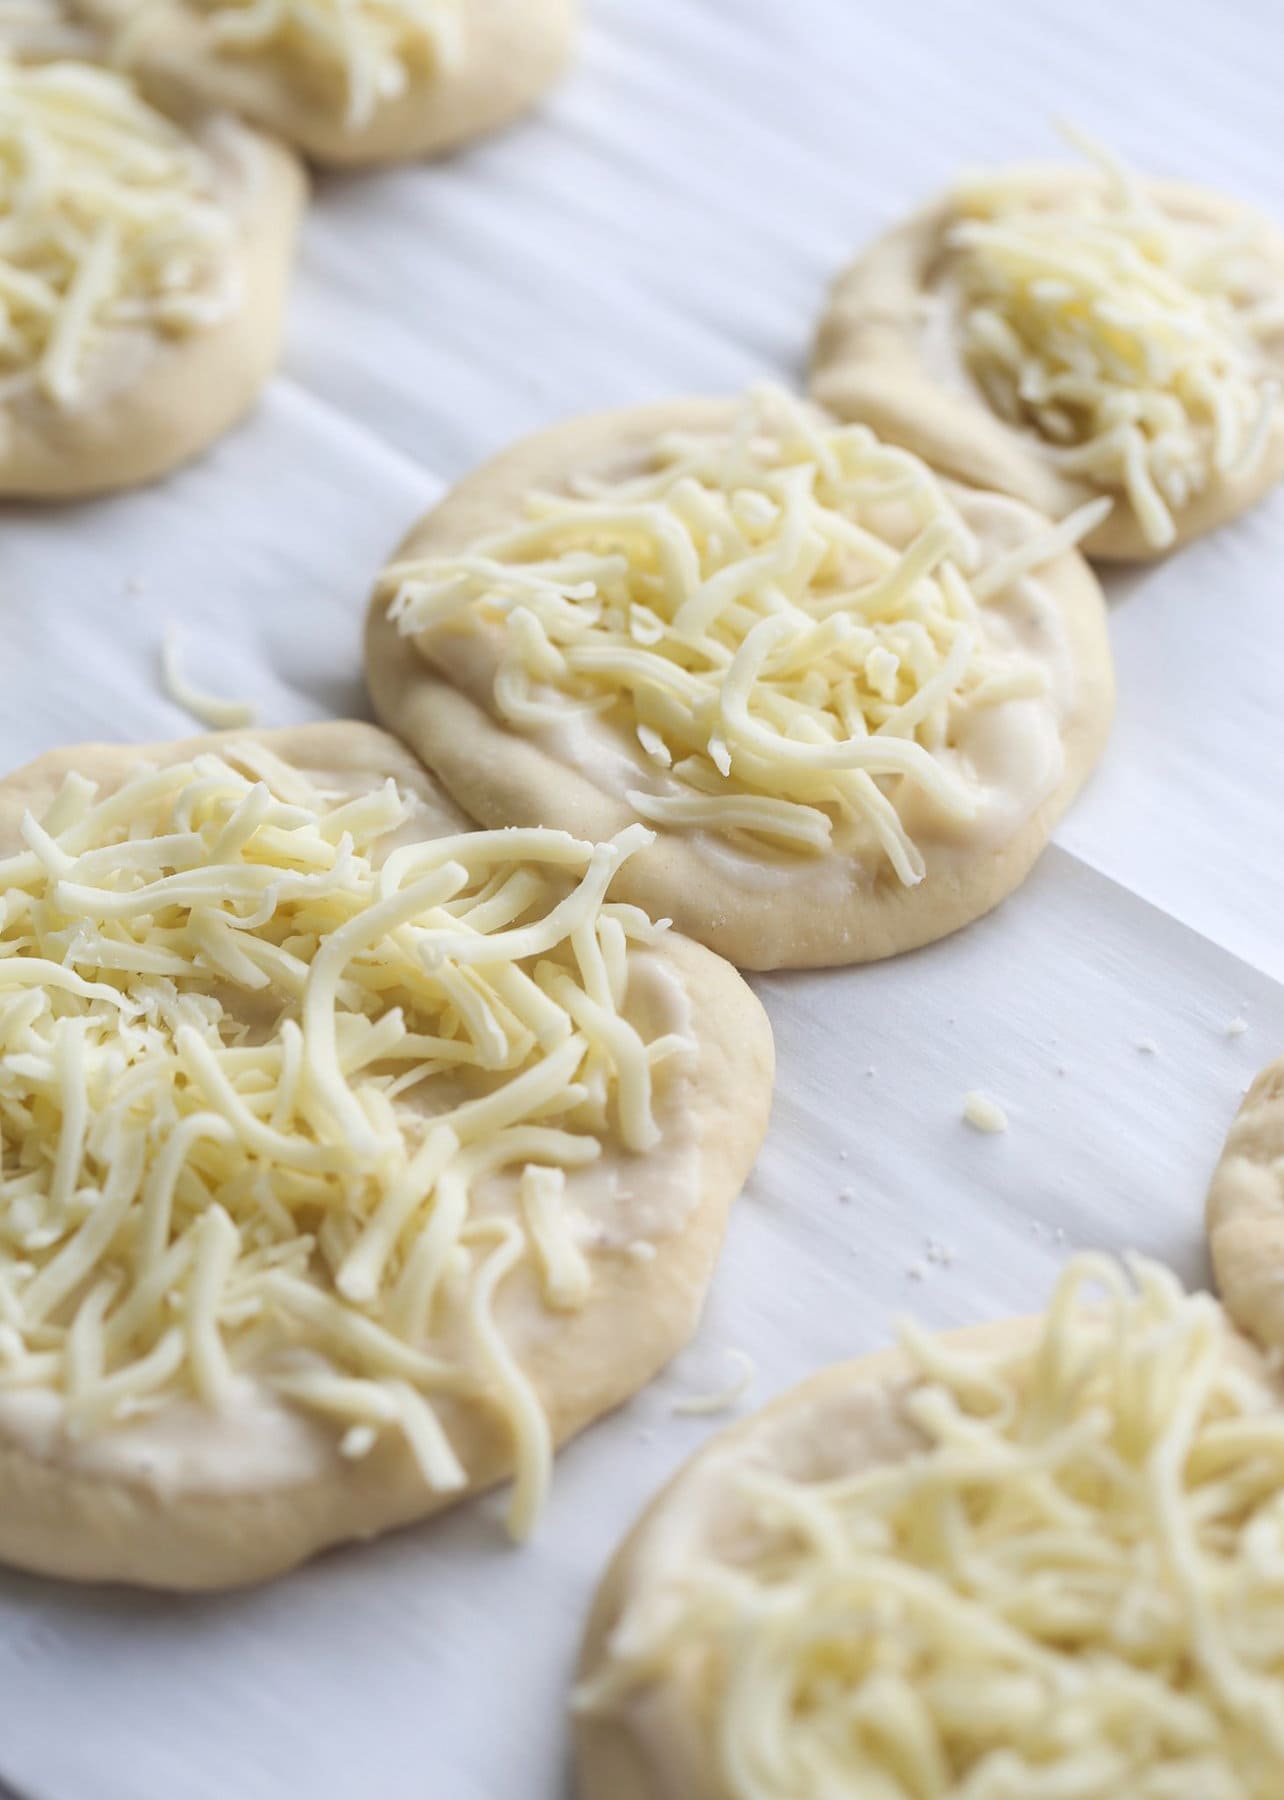 Pizza dough with cheese laid on top